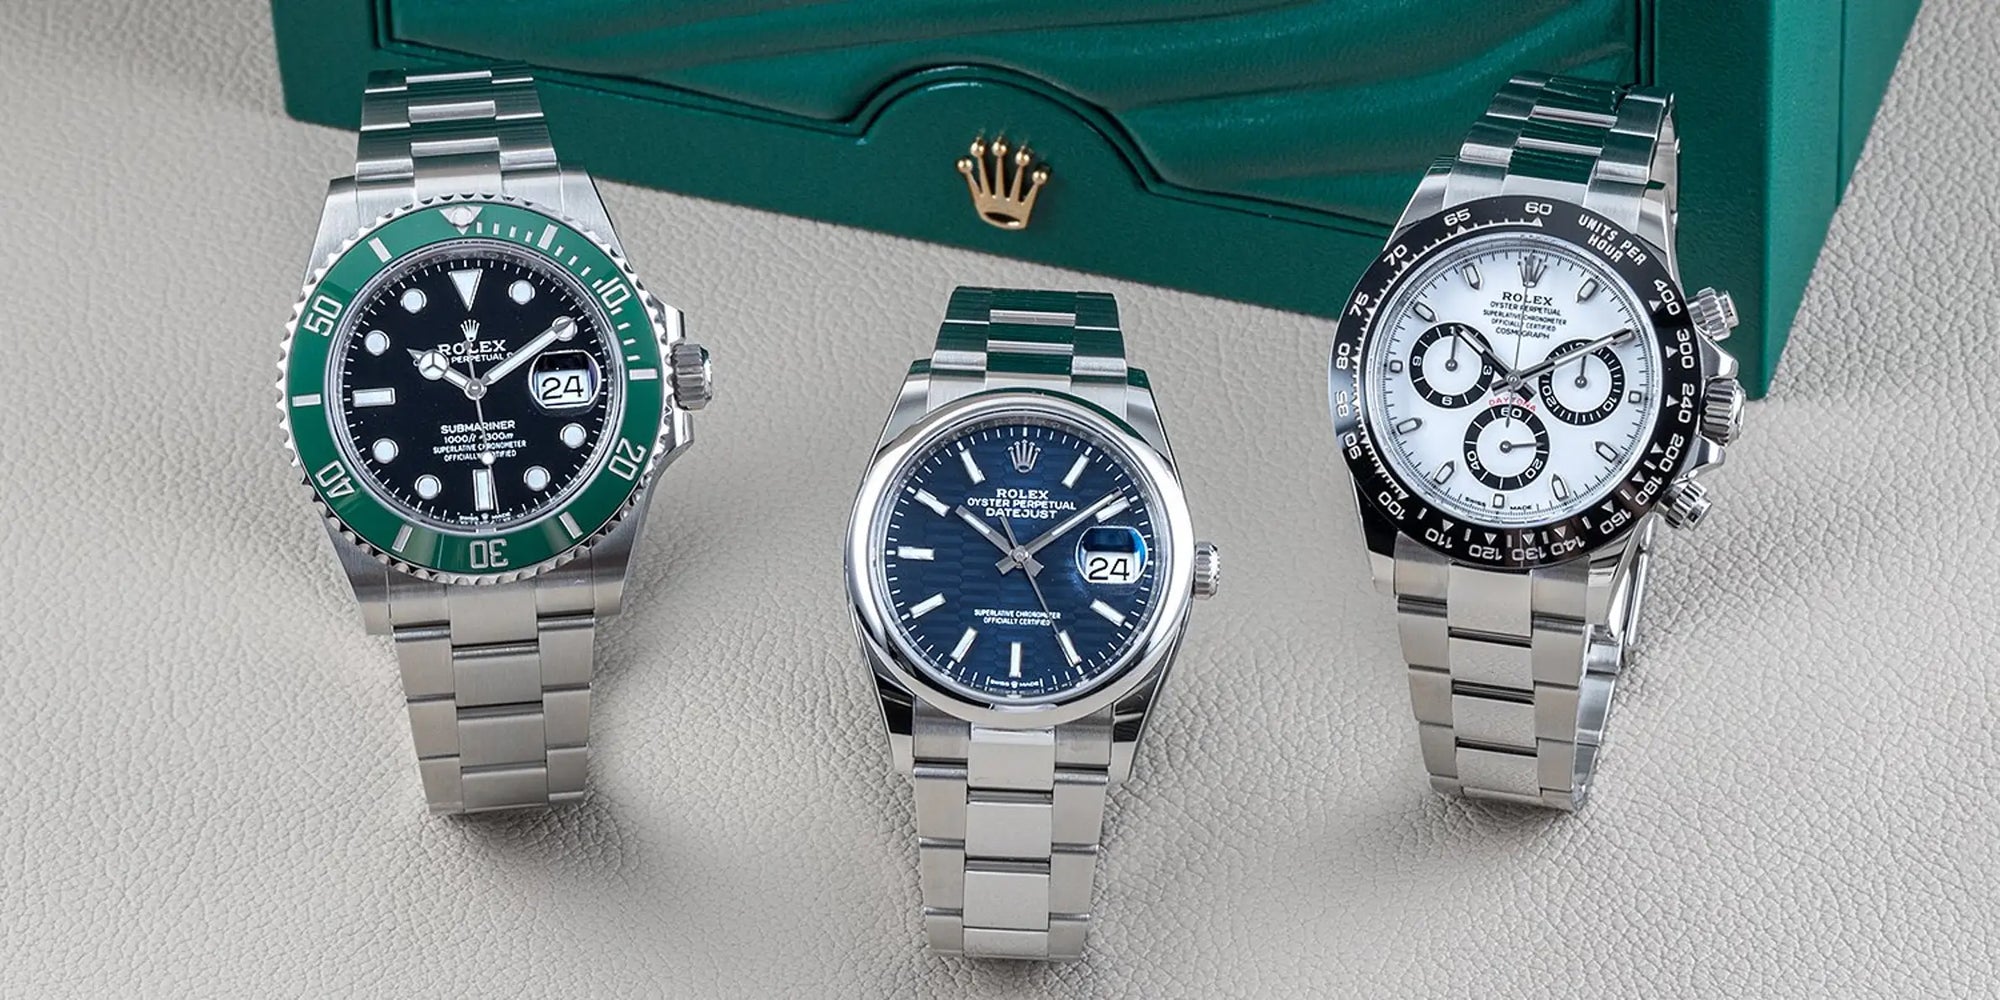 The Top Reasons Why Rolex Watches Retain Their Value